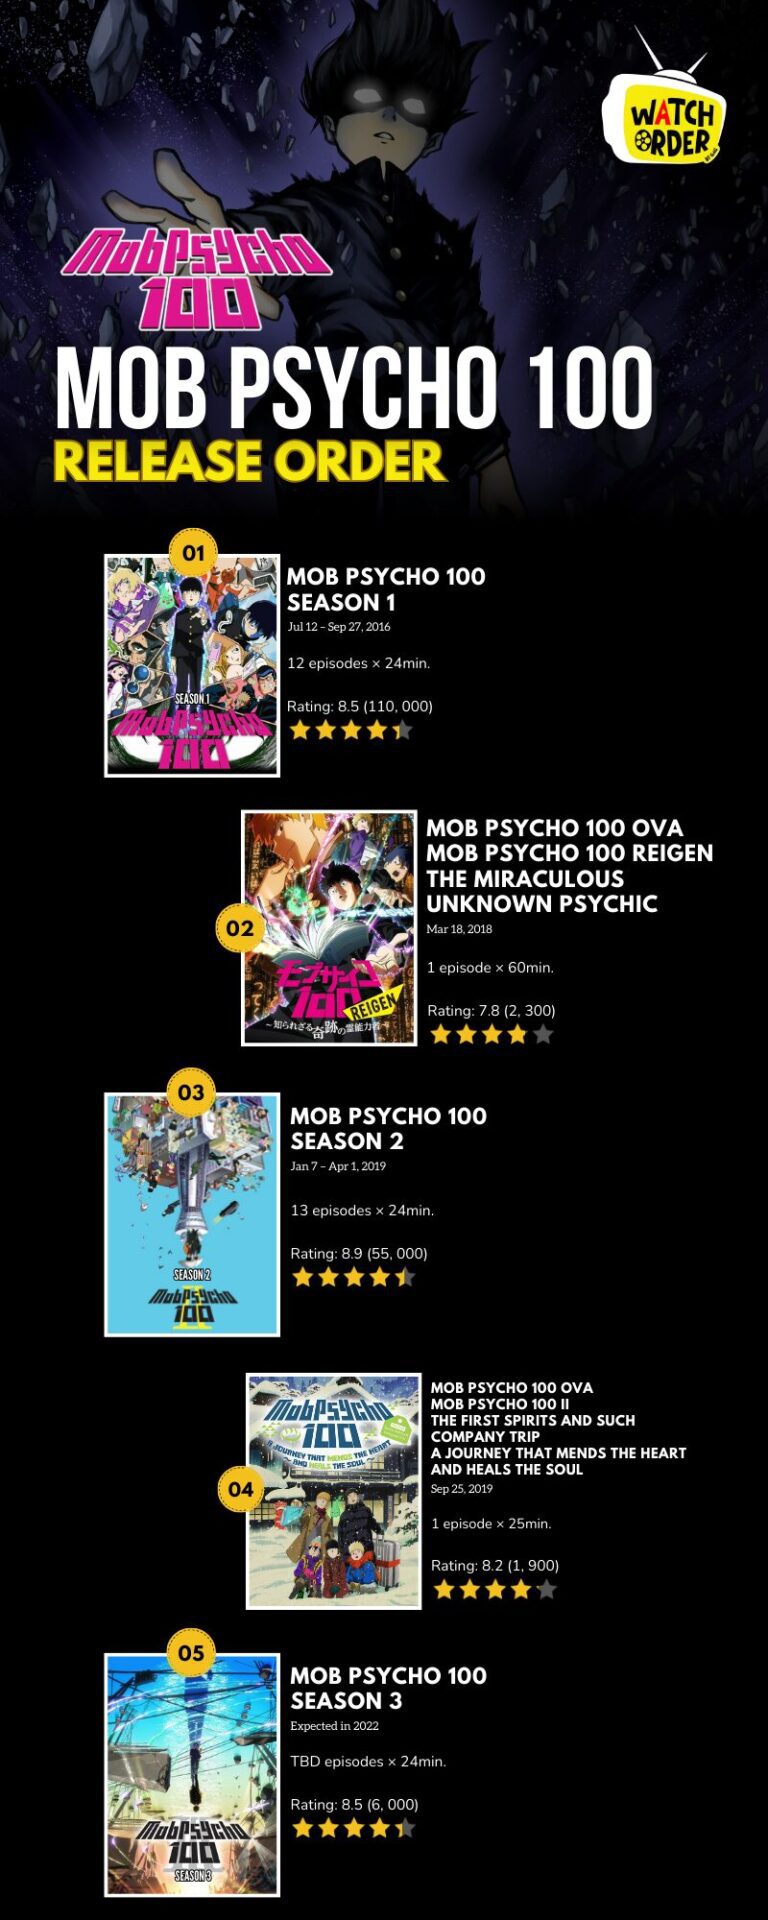 Mob Psycho 100 Release Order Infographic